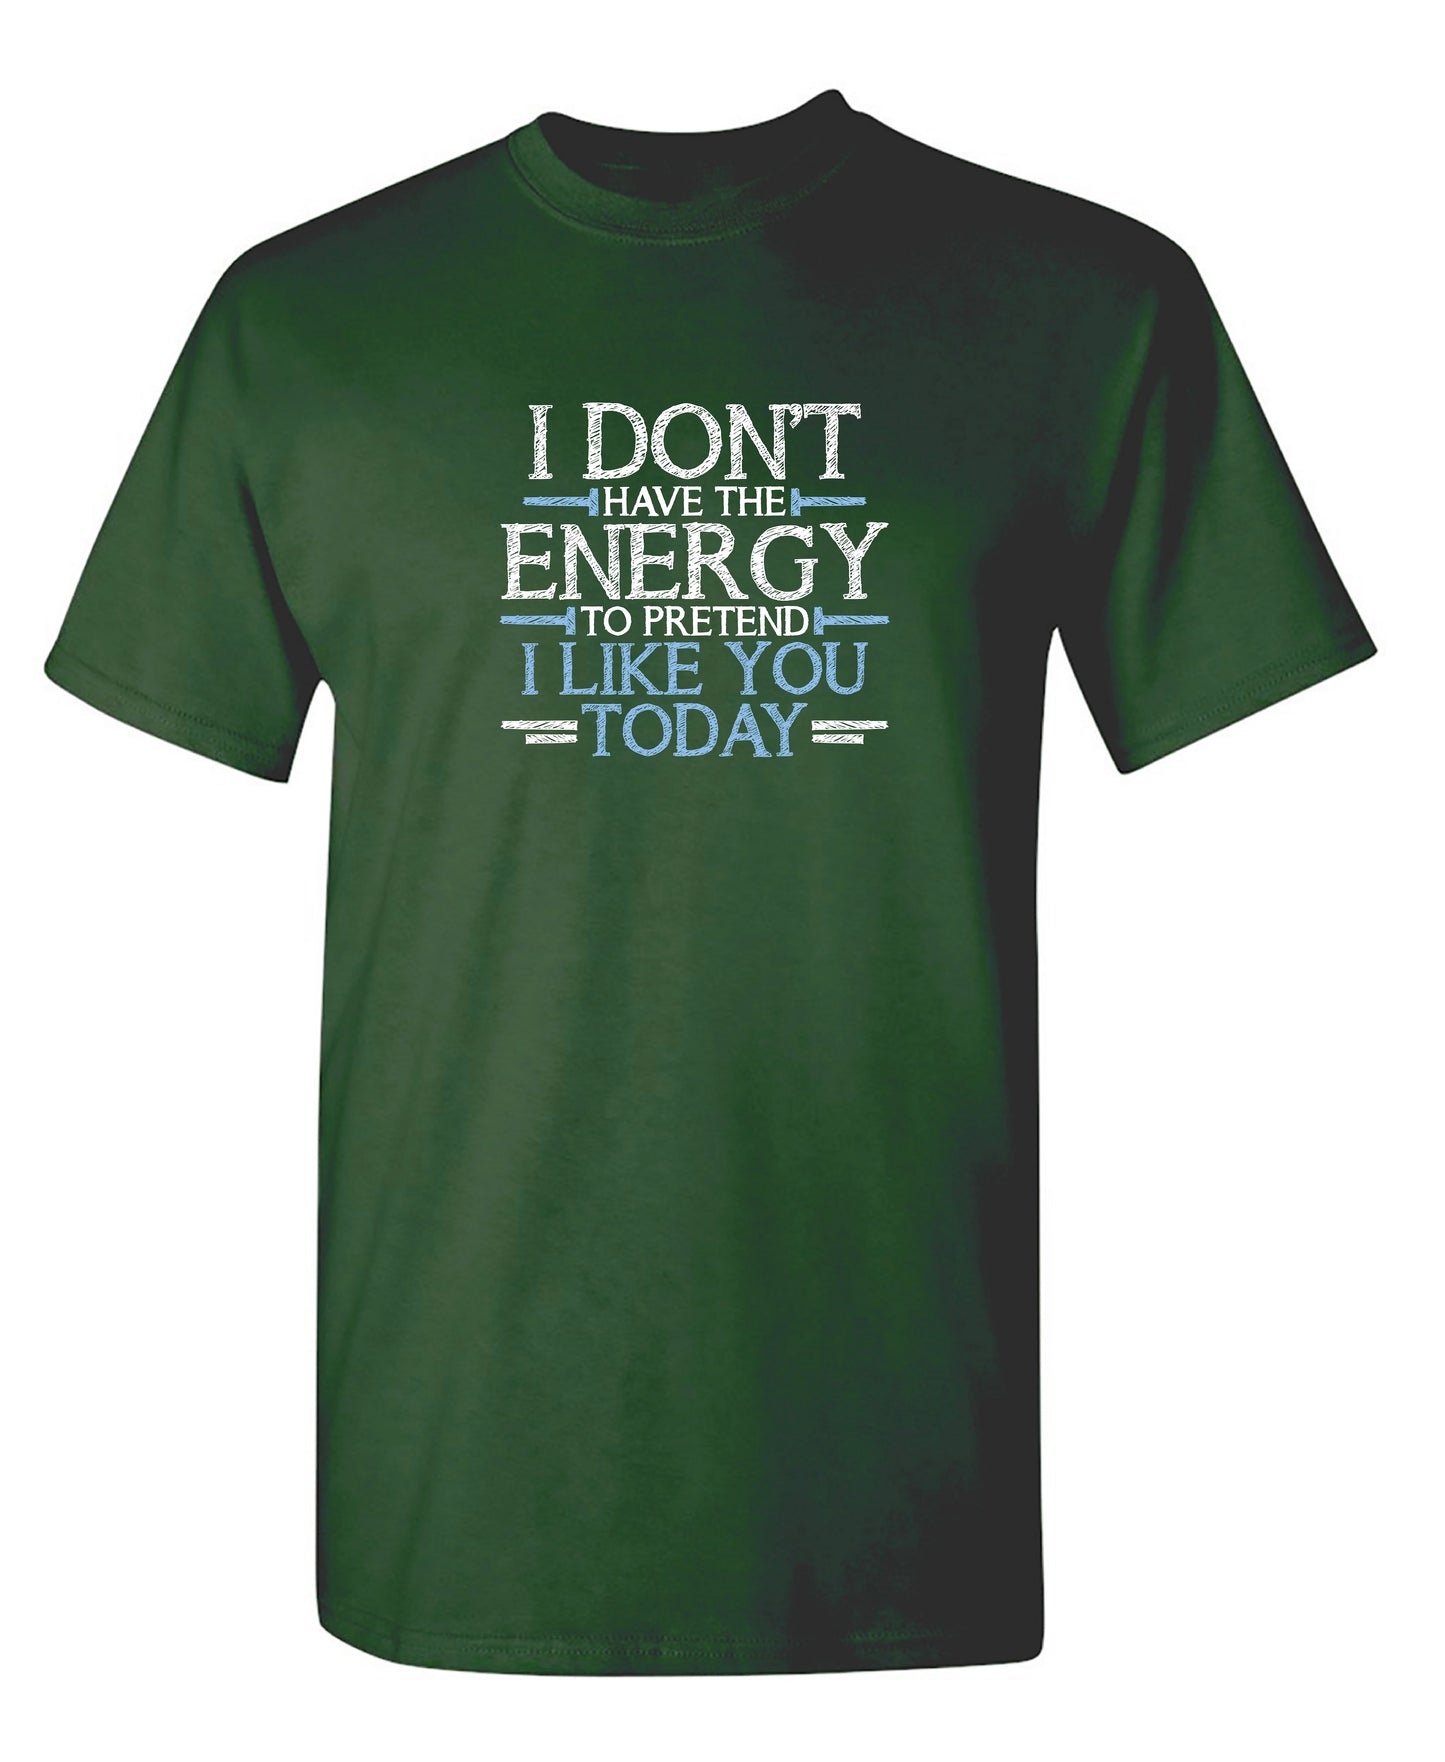 I Don't Have The Energy To Pretend I Like You Today - Funny T Shirts & Graphic Tees